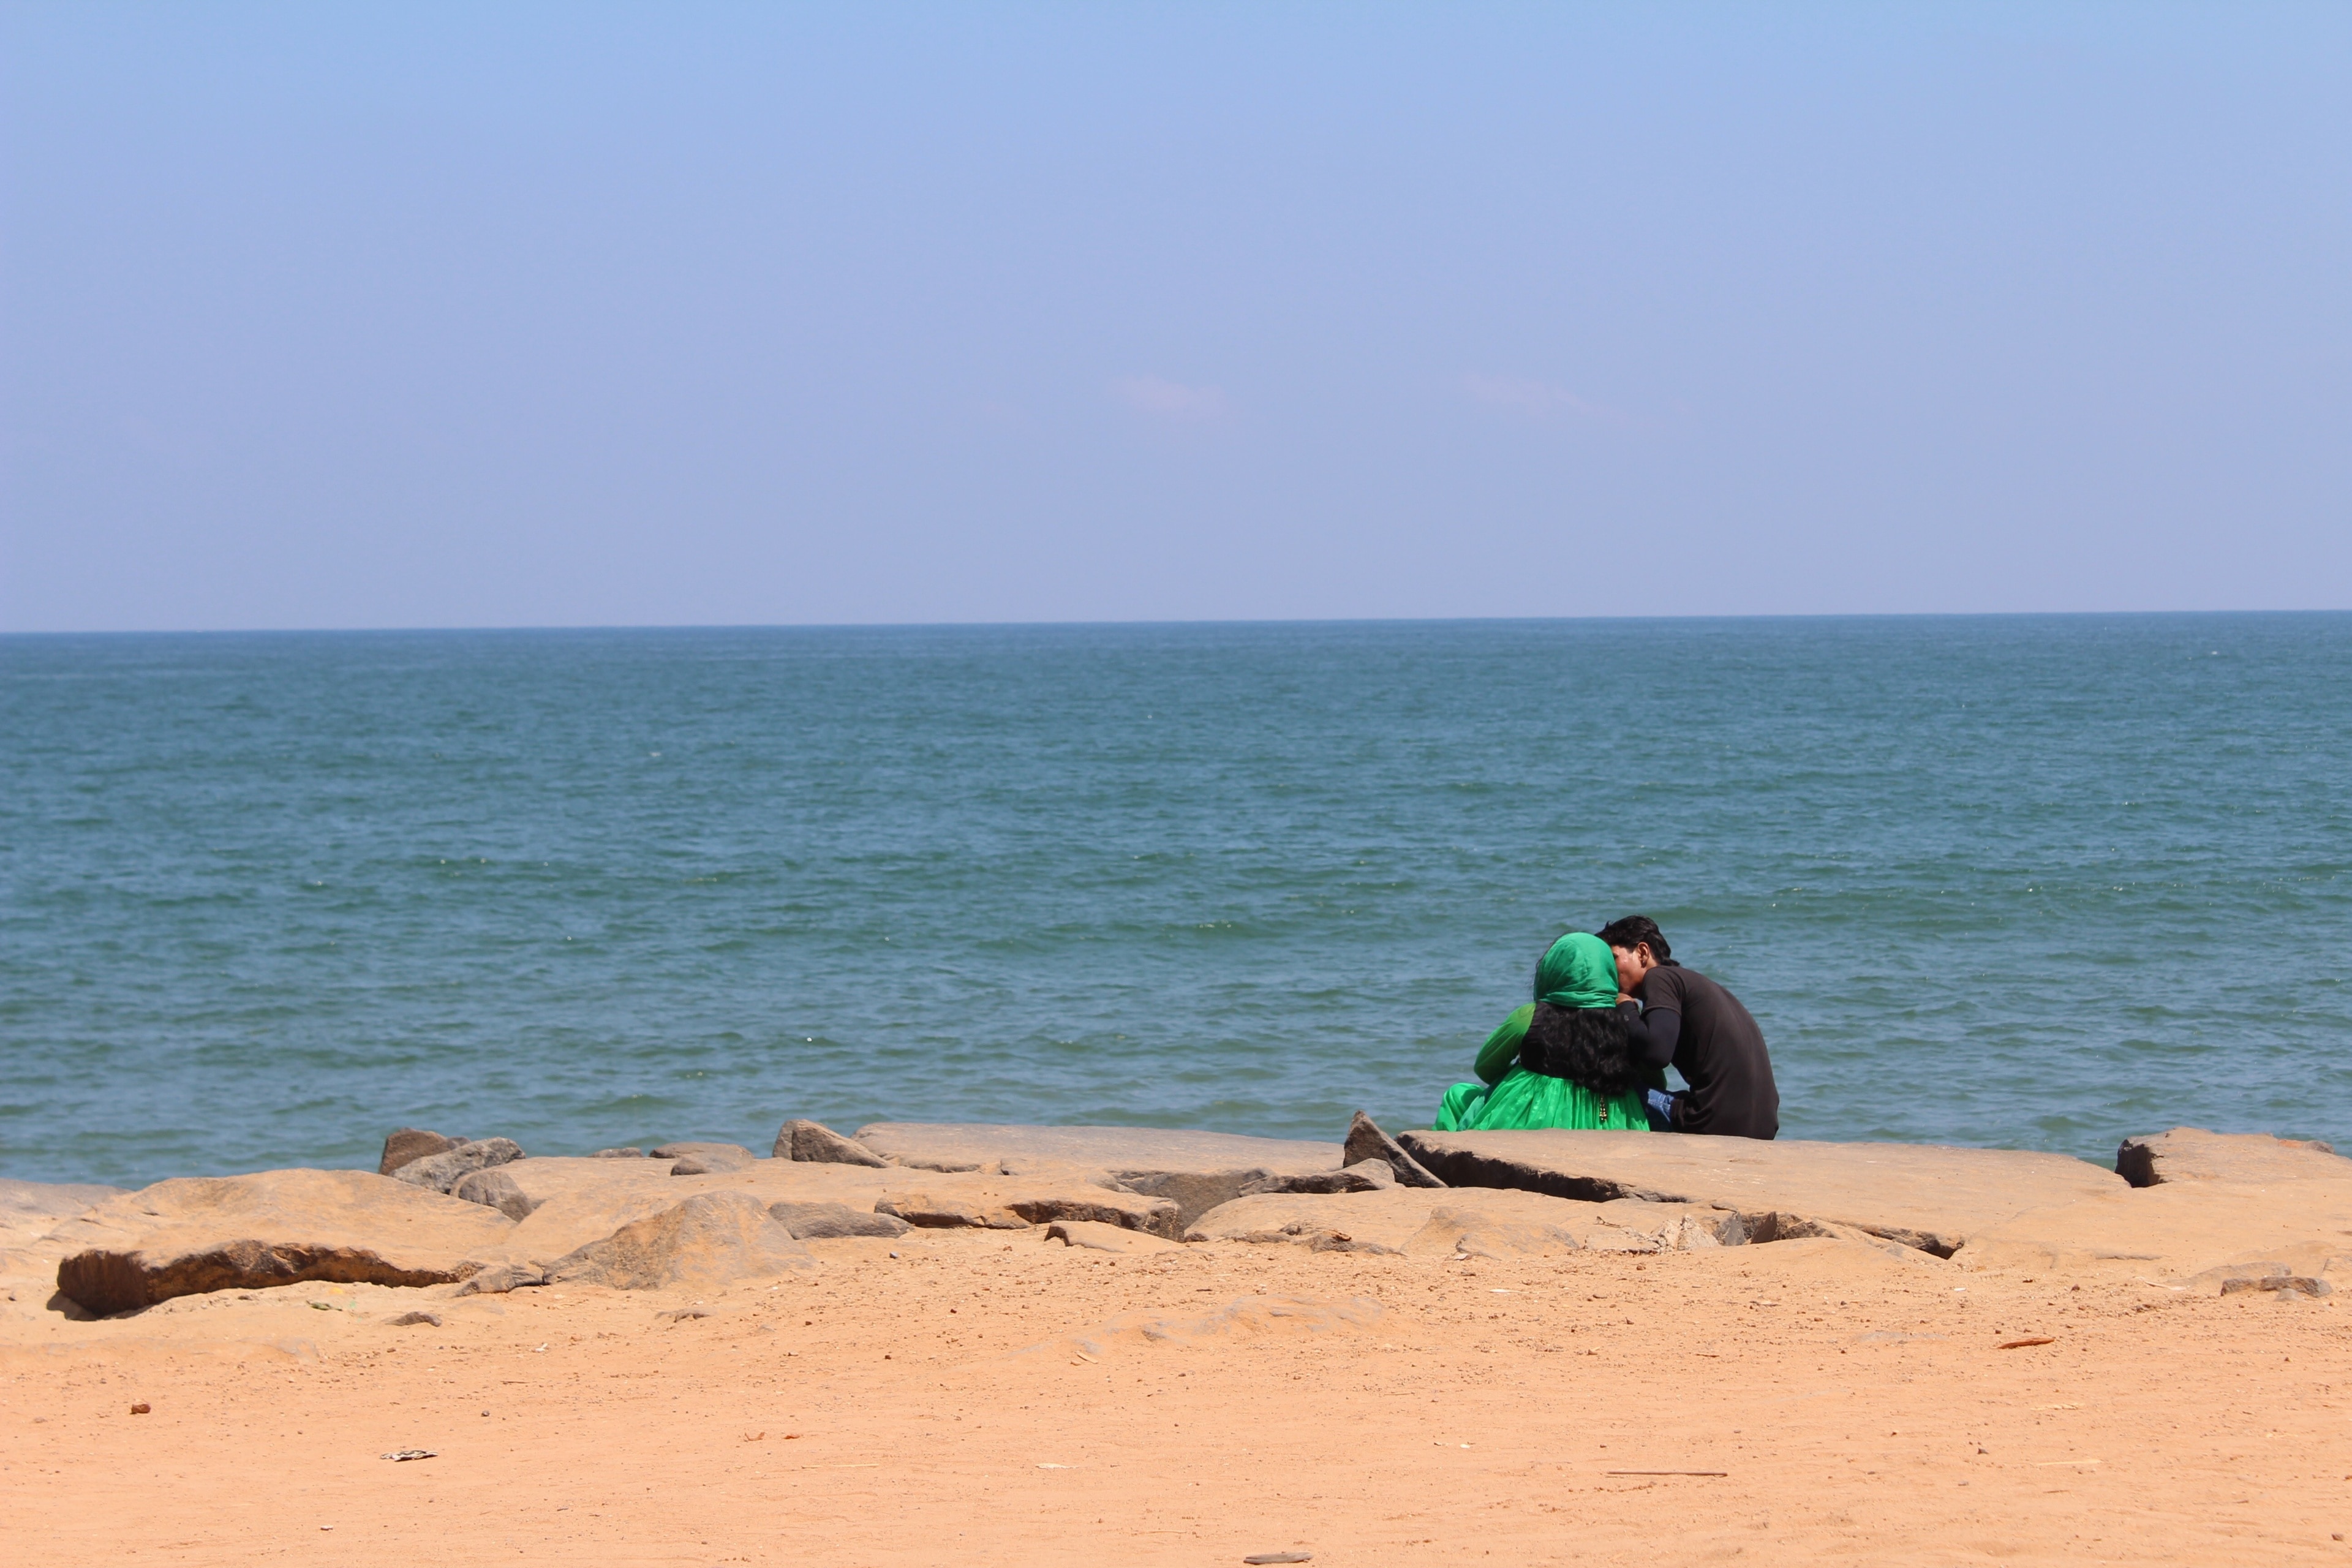 whispering secrets on the sea front of puducherry
#OnTheRoad